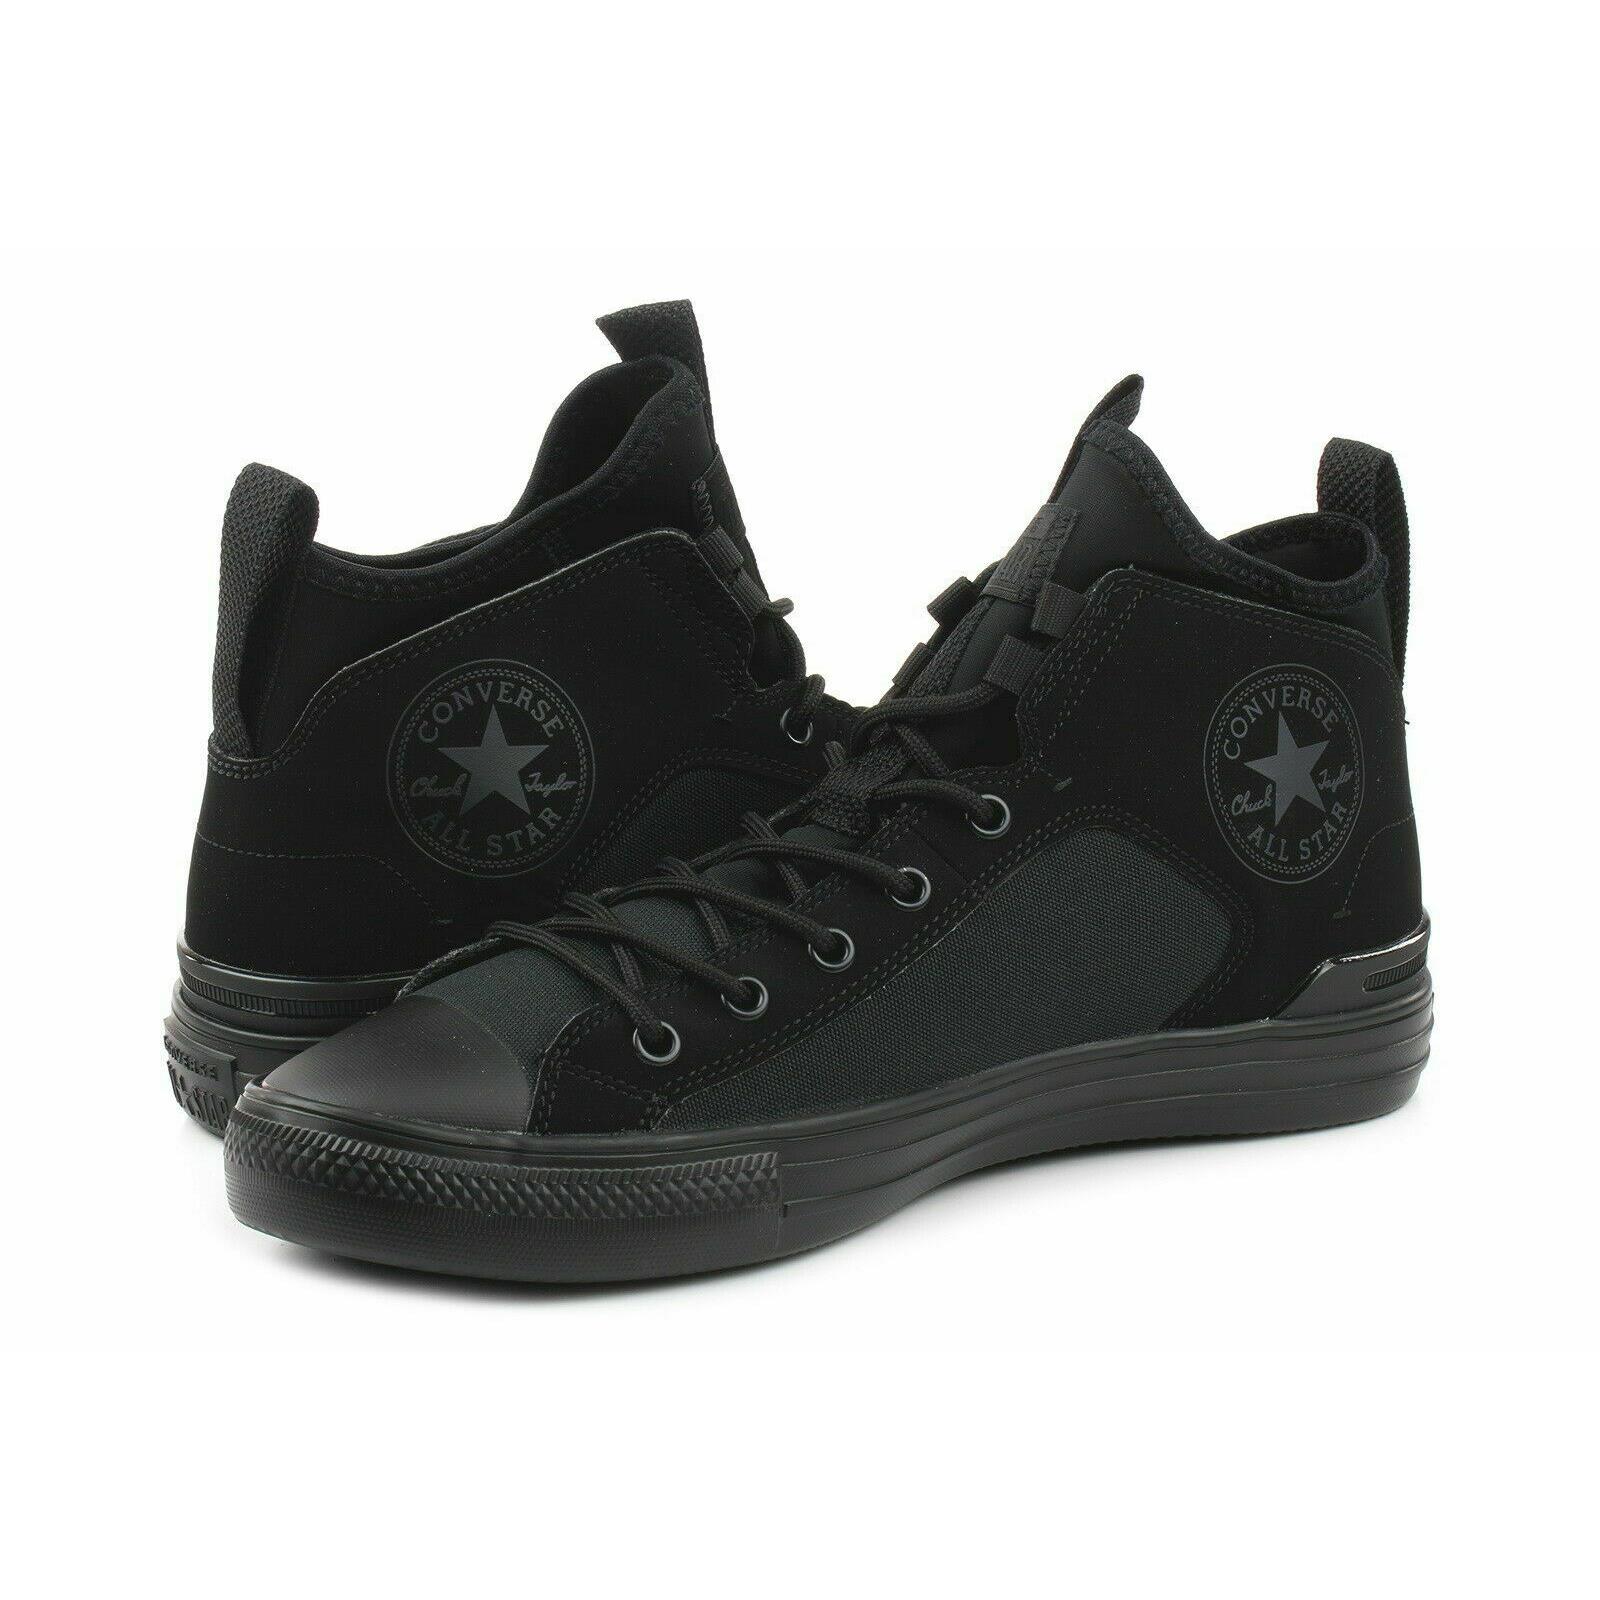 Converse Chuck Taylor All Star Ultra Mid 162378C Men`s Black Sneakers Shoes HS54